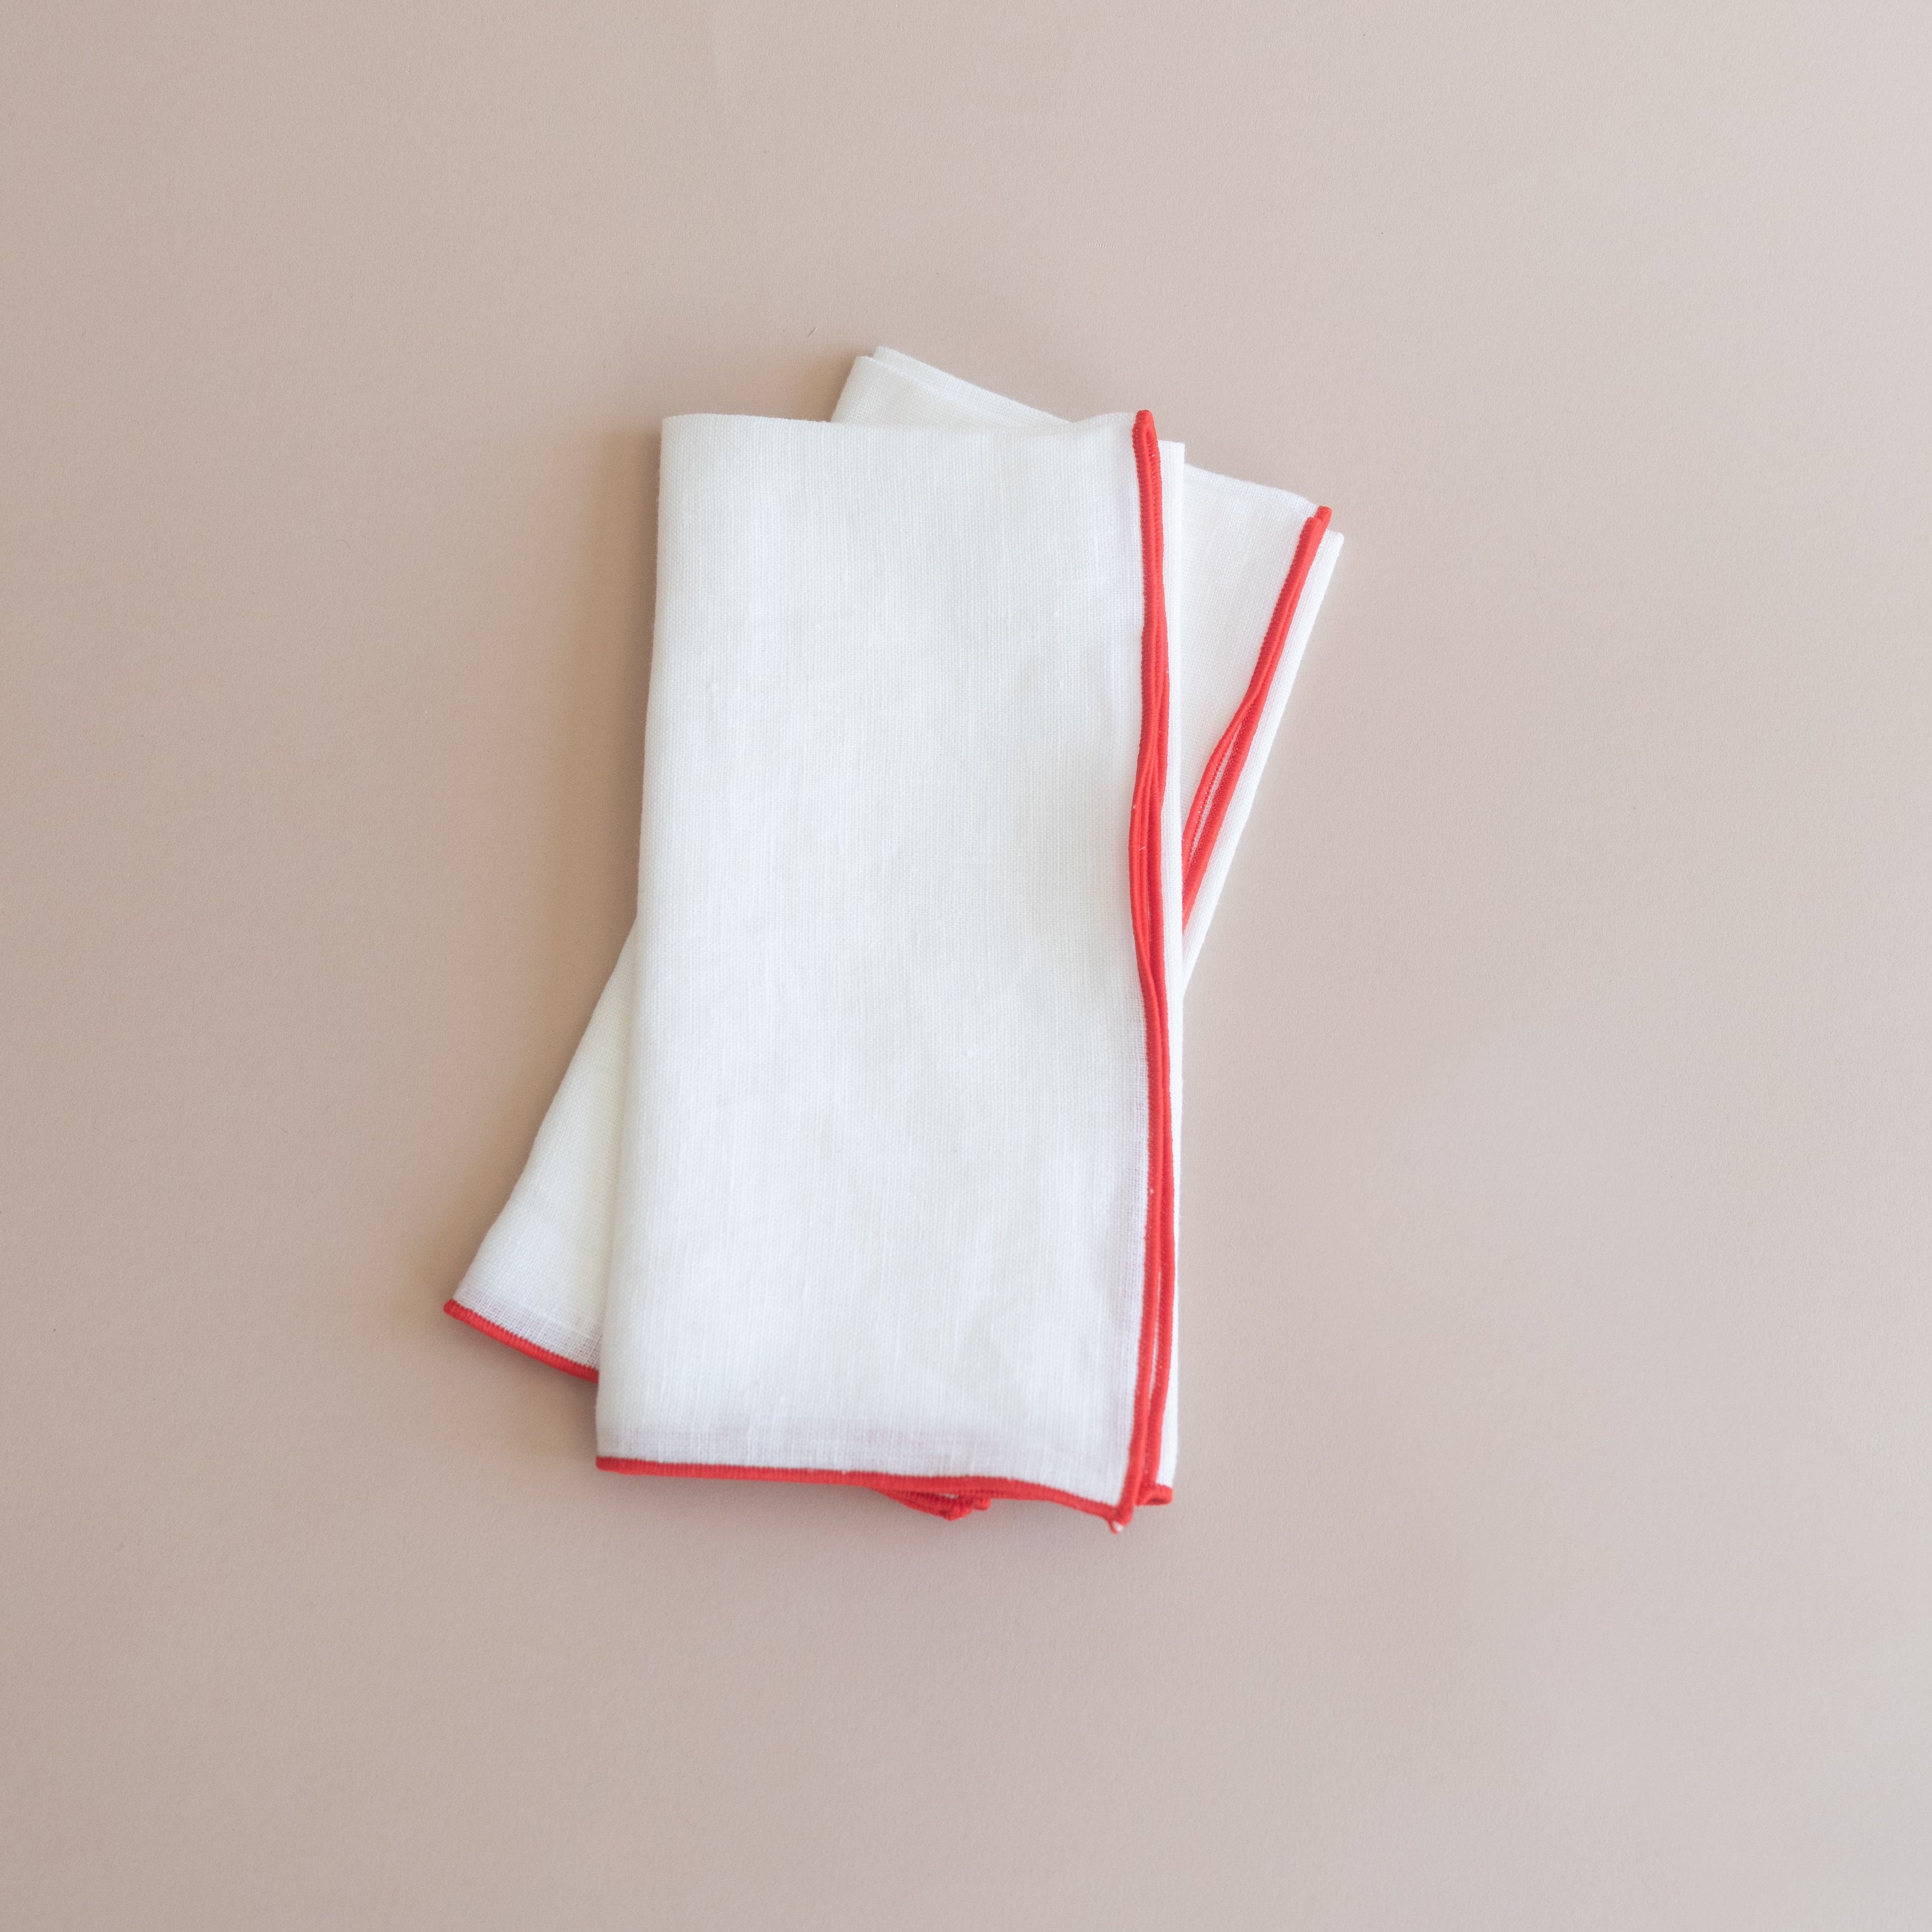 Madre Linens Leche / Medium Napkins by Madre